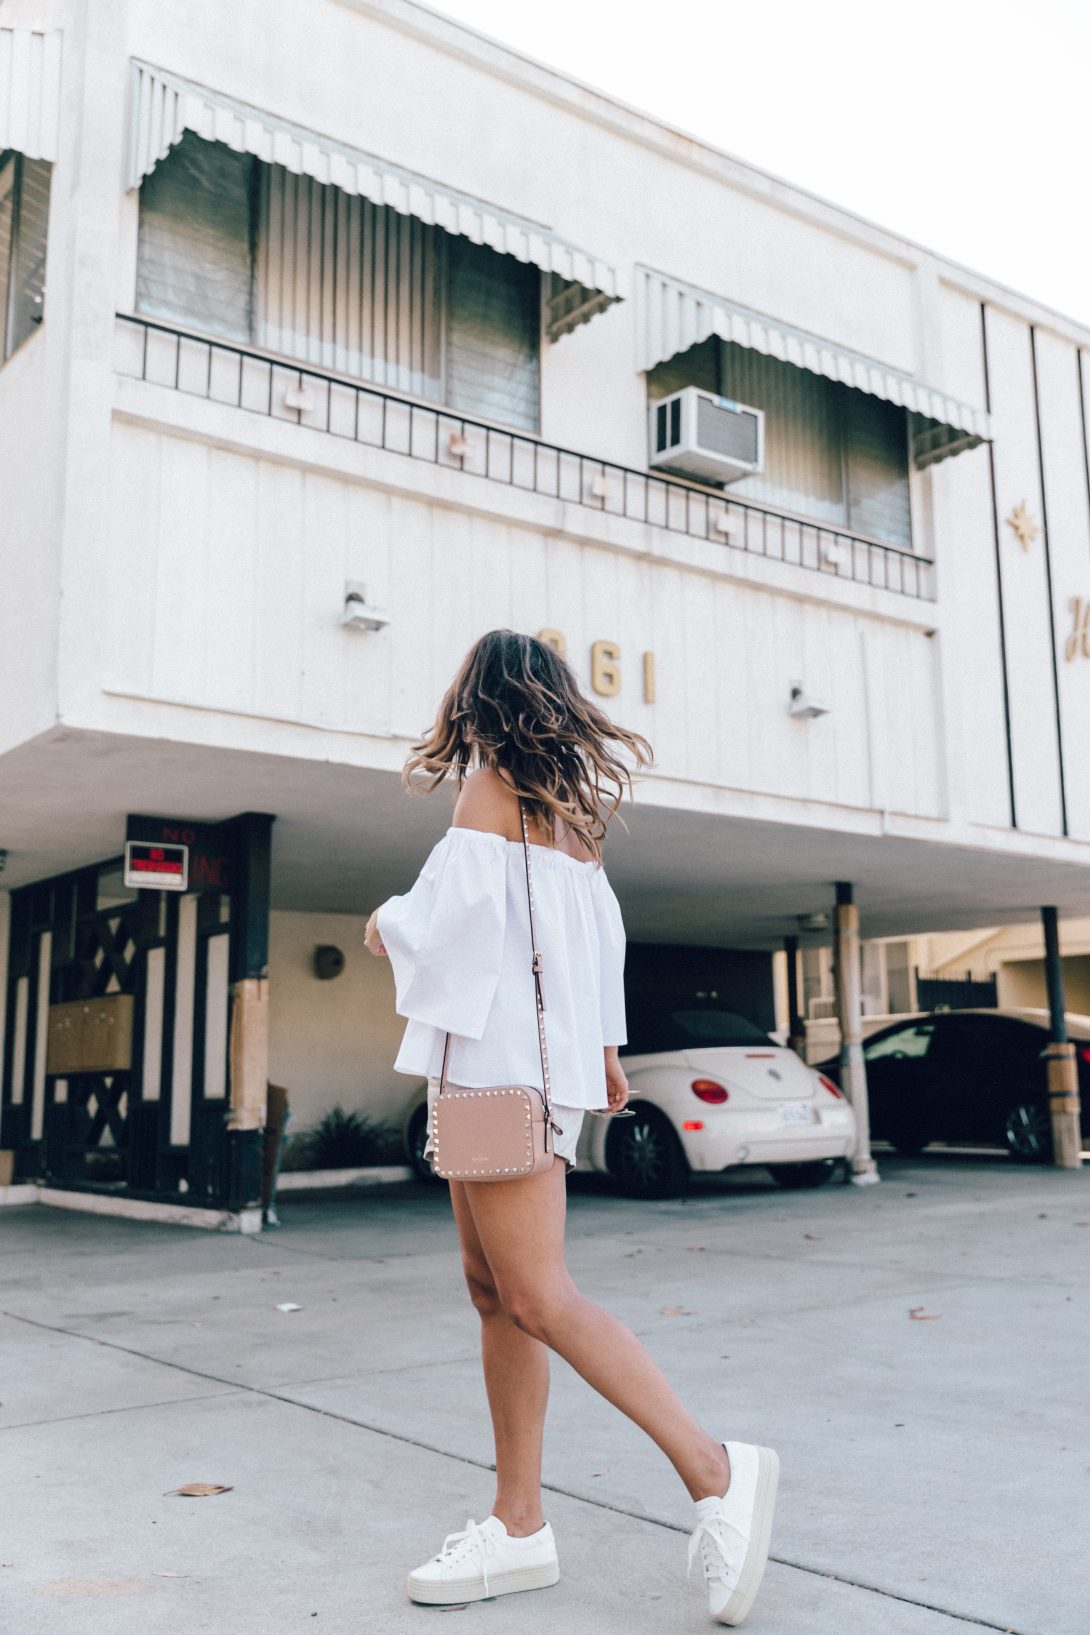 Off_The_Shoulders-Chicwish-Valentino_Bag-Monnier_Fevres-Sneakers-Saint_Laurent-Reformation_Shorts-Outfit-Los_Angeles--37